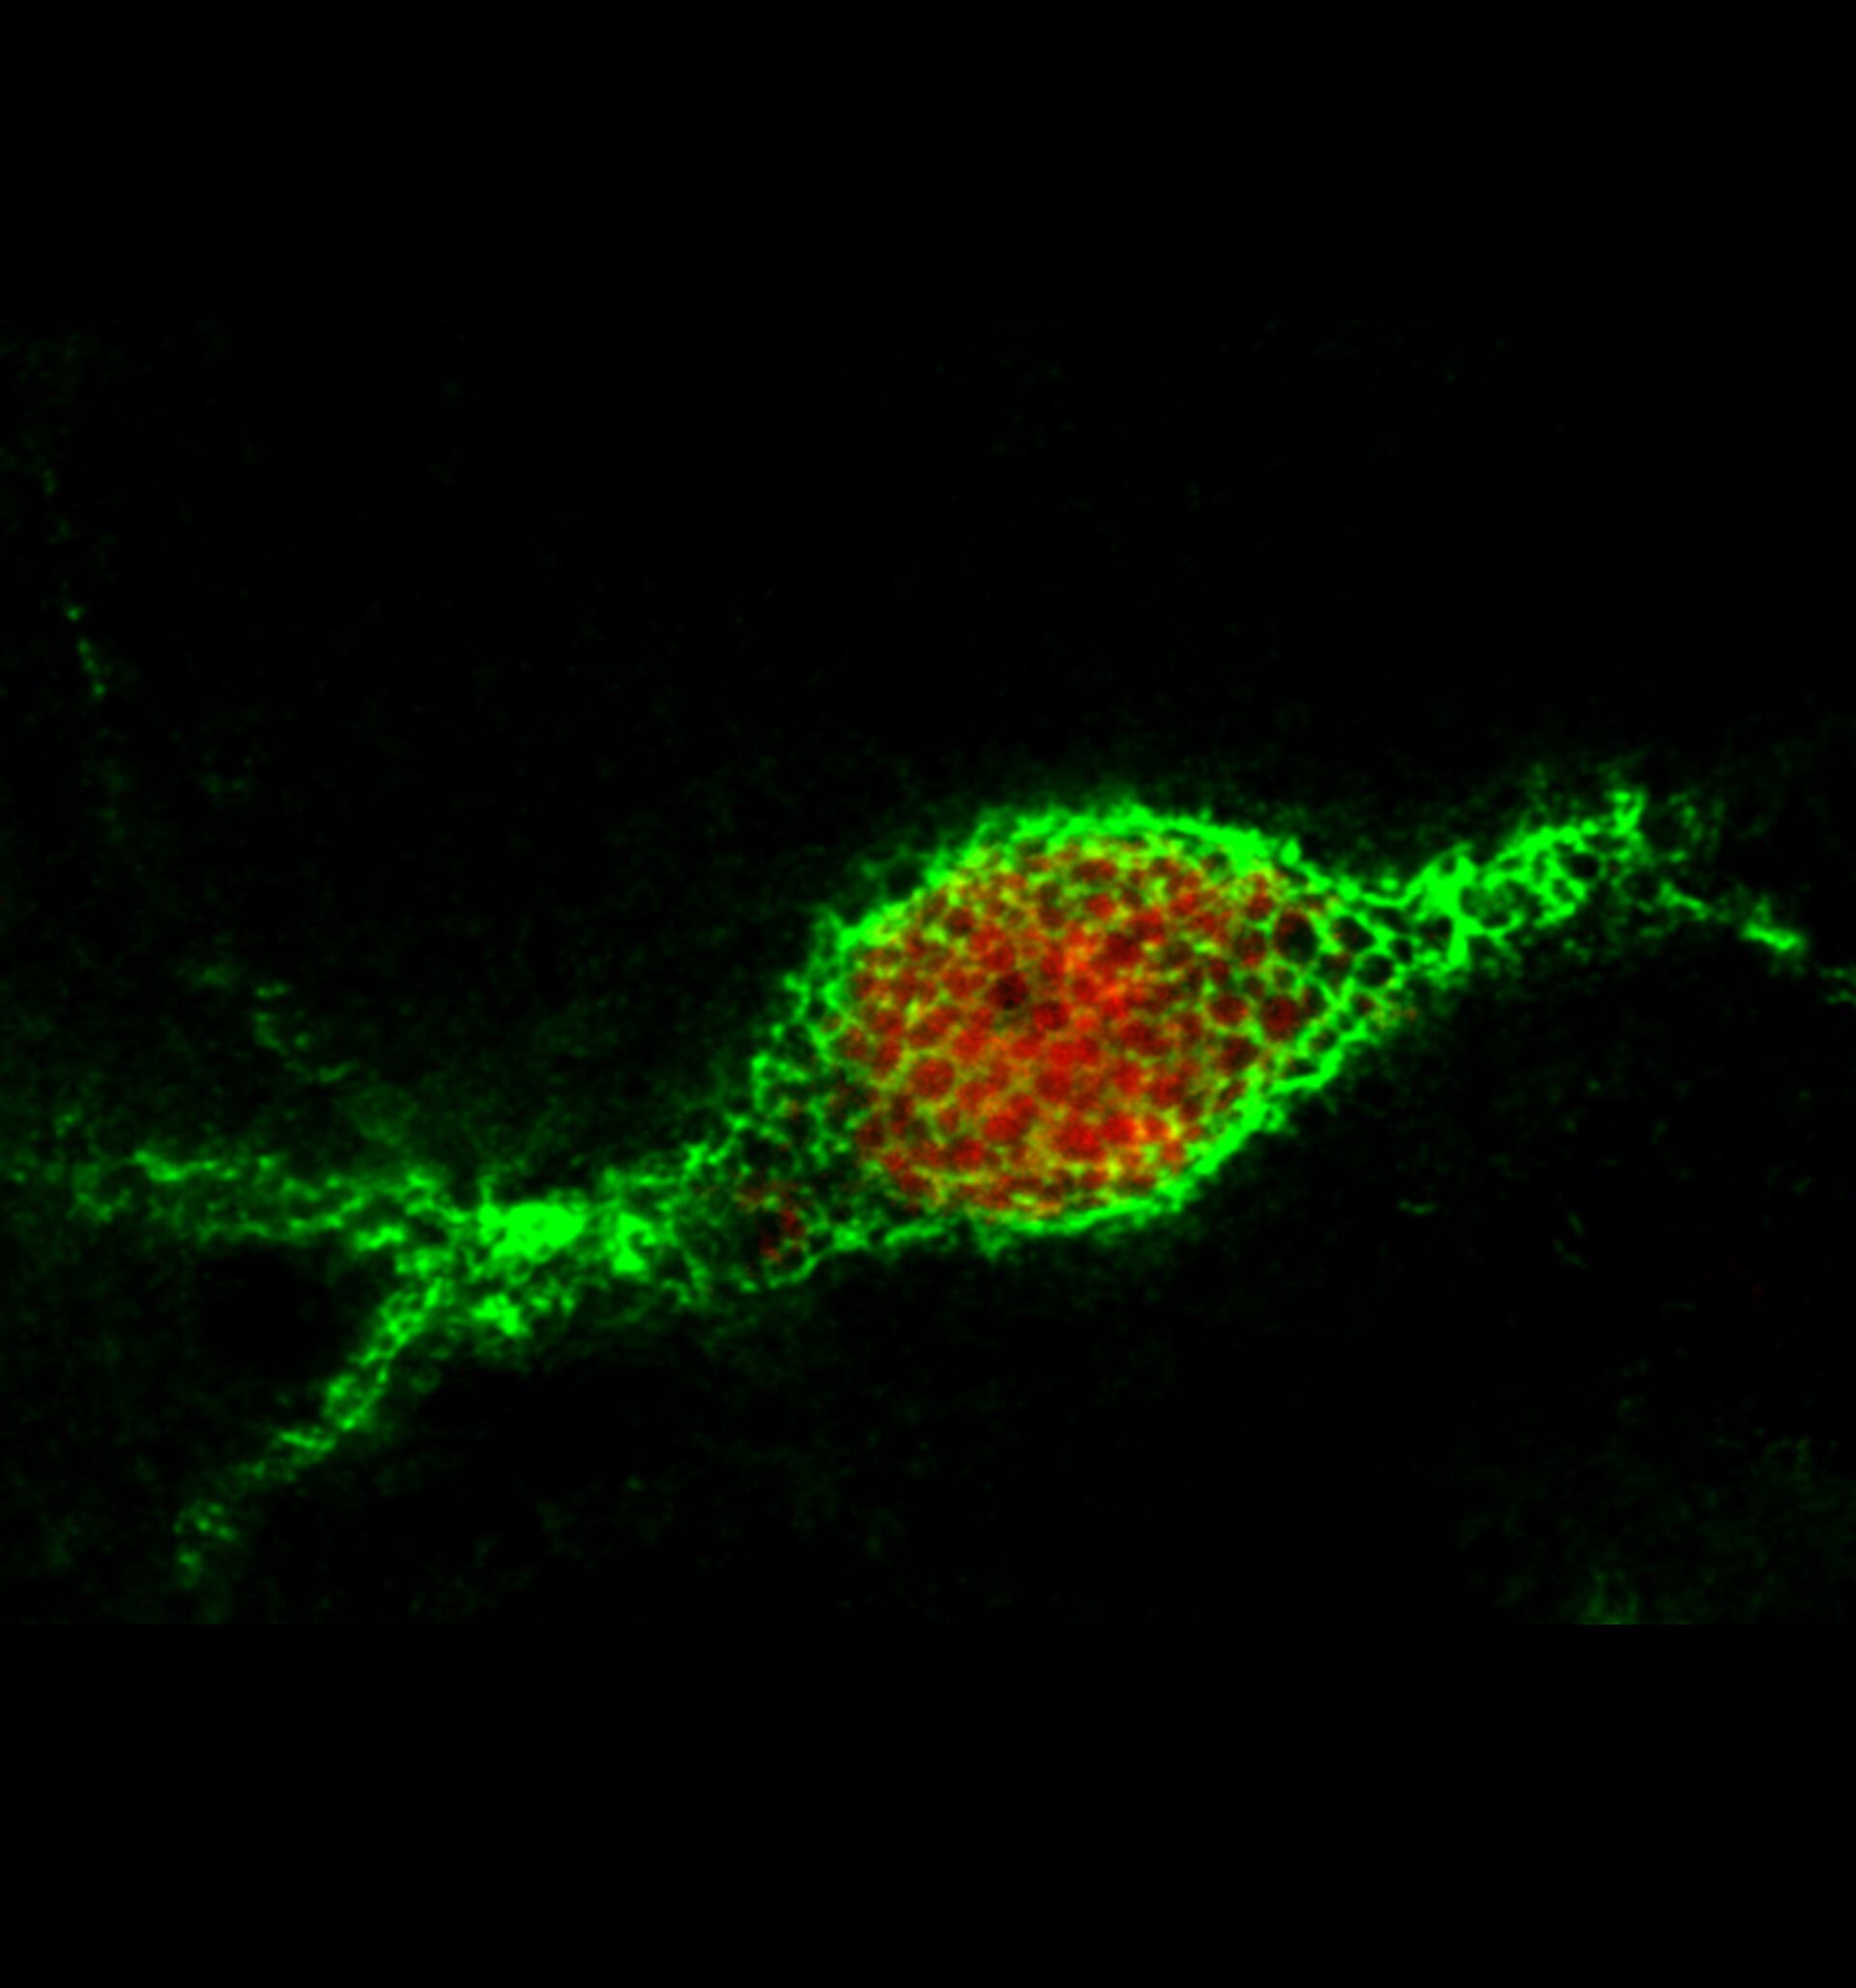 Perineuronal net in green wrapped around a neuron in red